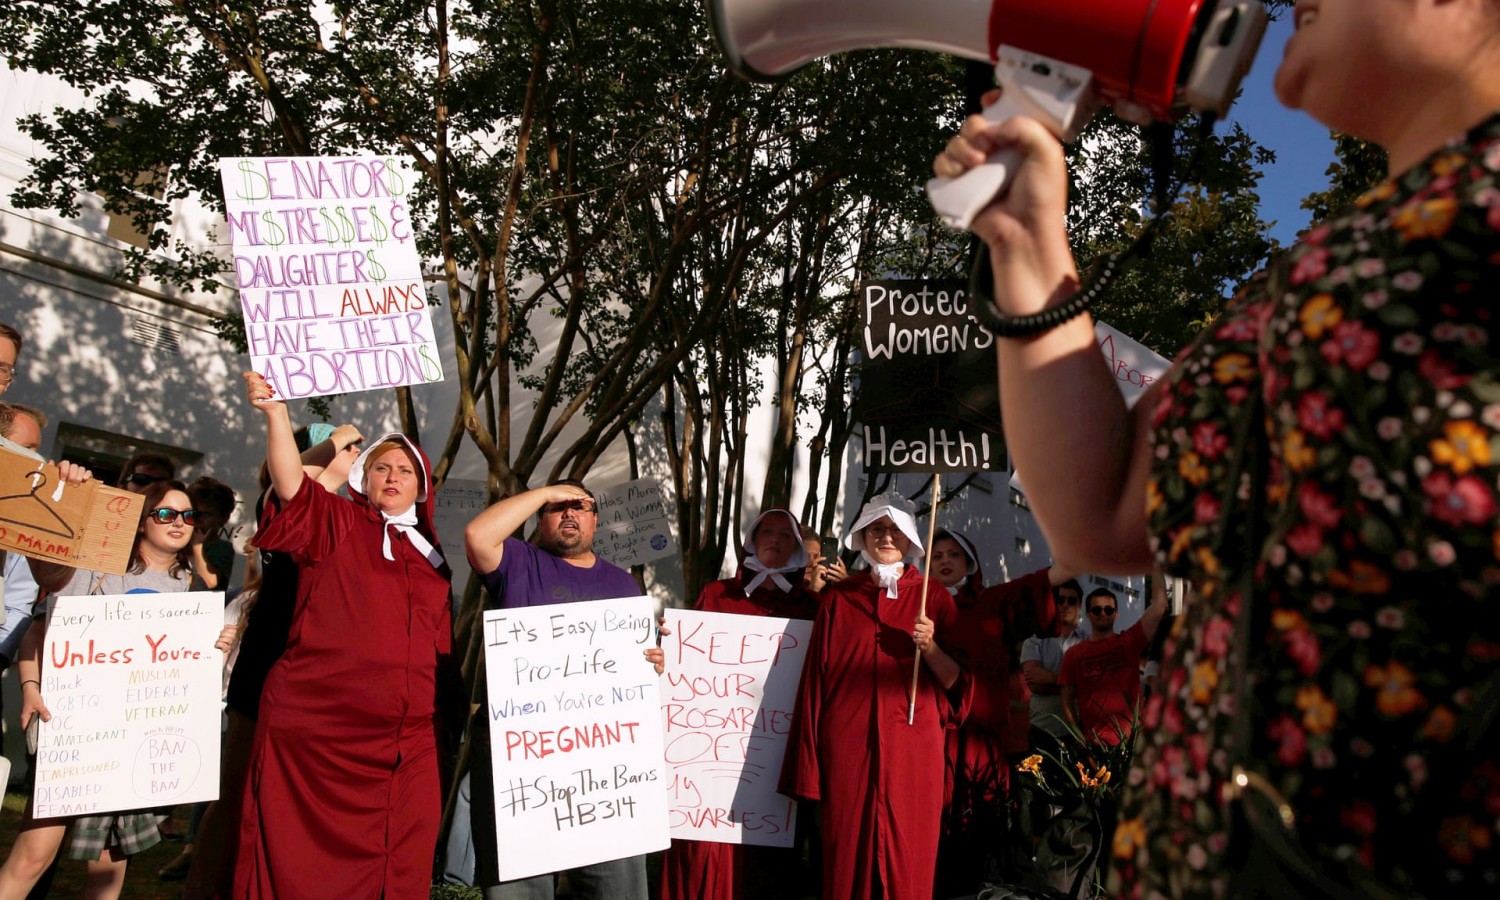 Pro-choice supporters protest as Alabama state senate votes on the strictest anti-abortion bill in the United States. Photograph: Christopher Aluka Berry/Reuters